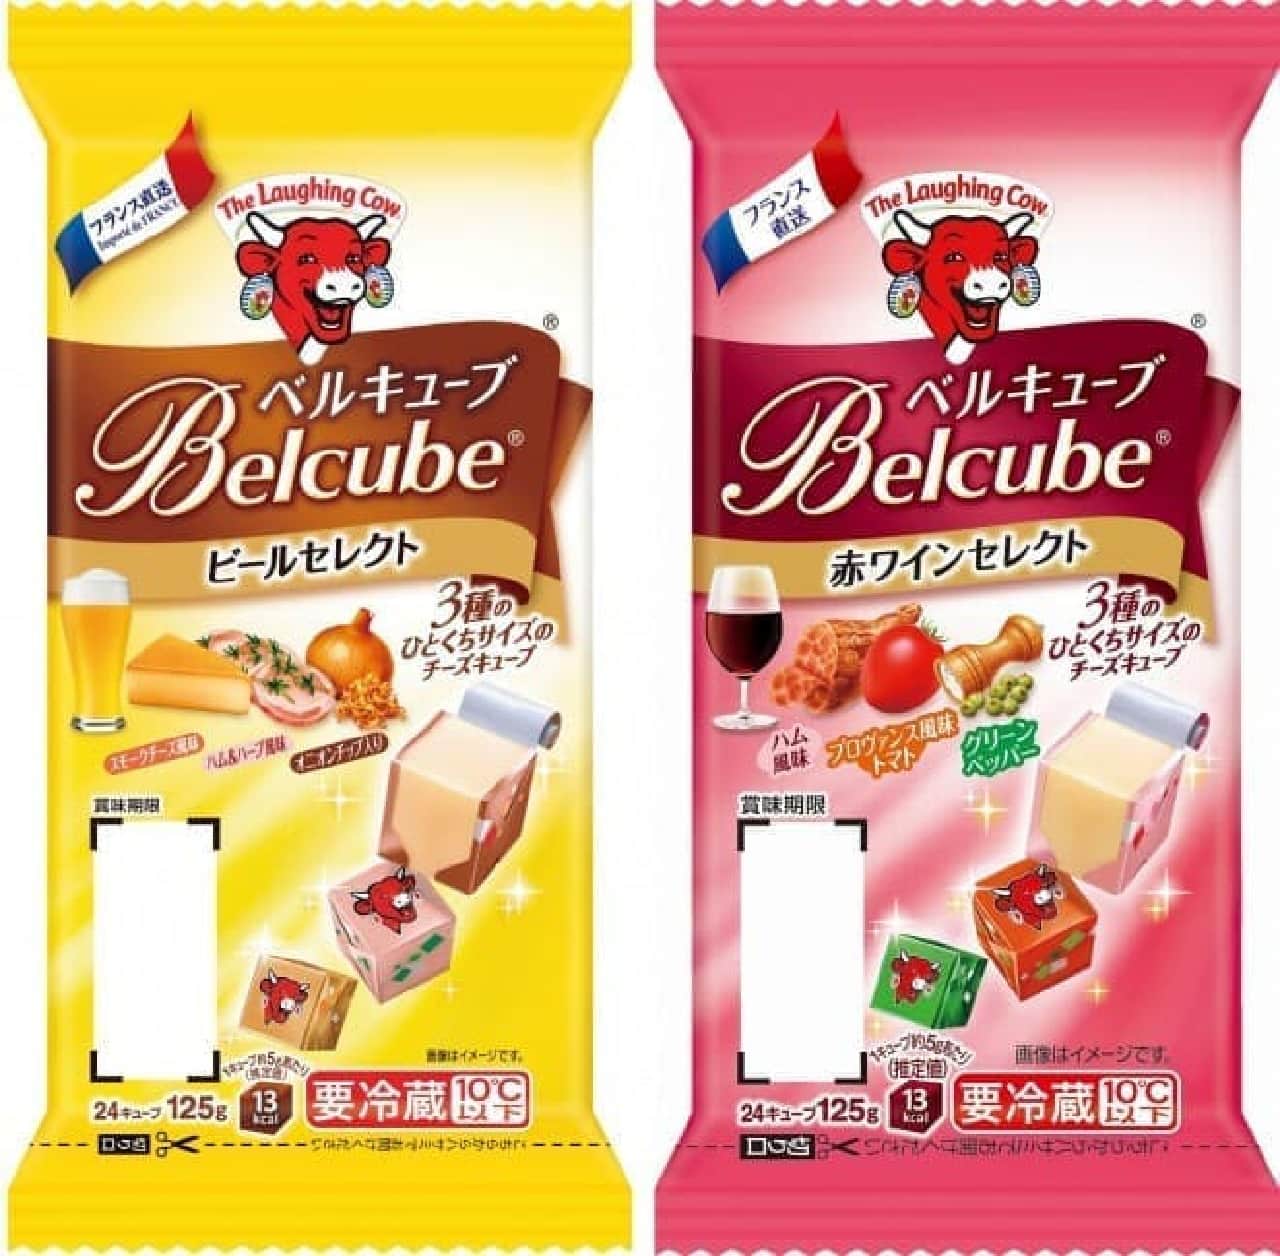 Bell Cube "Popular Flavor Select"